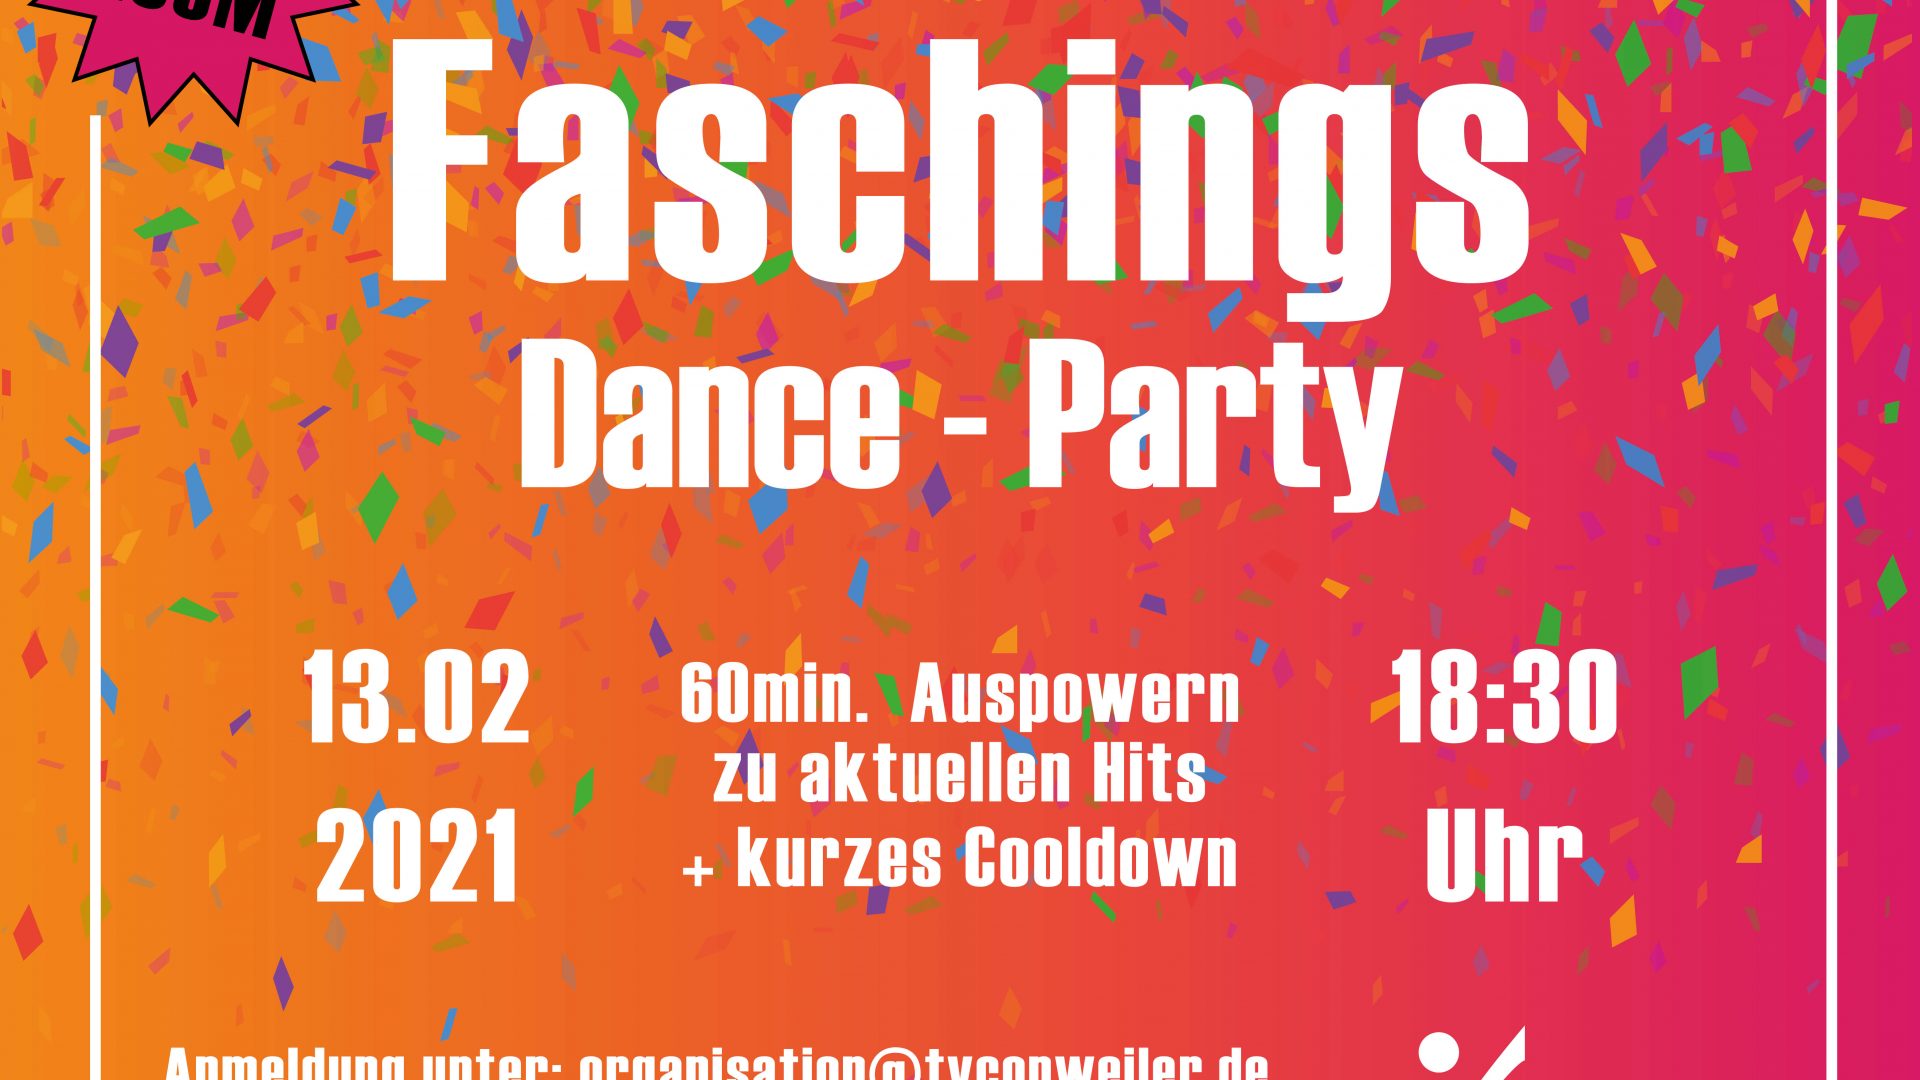 Faschings Dance-Party! Samstag - 13.02.2021